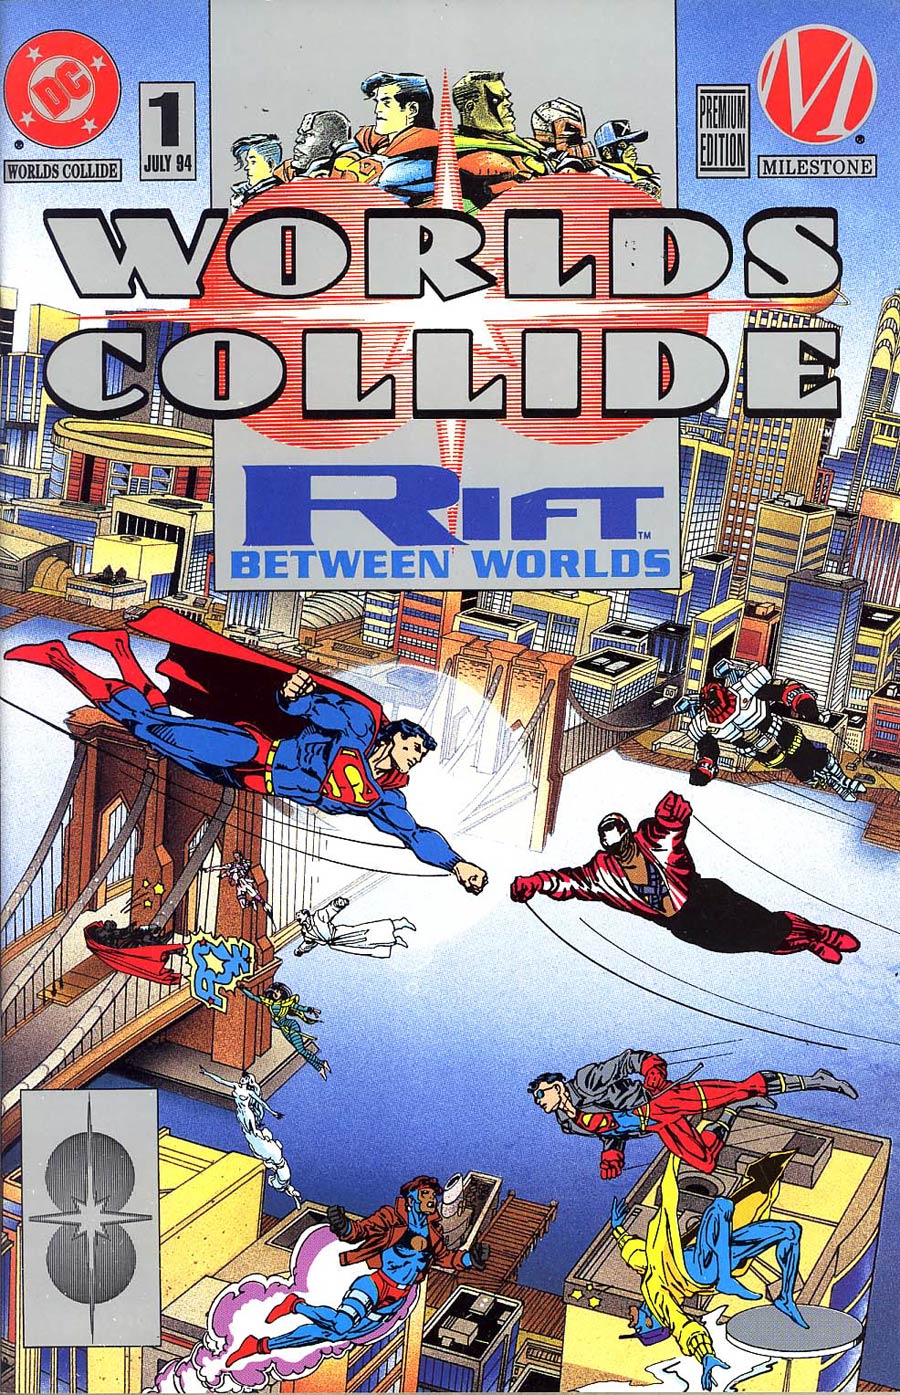 Worlds Collide #1 Cover D Platinum Cover